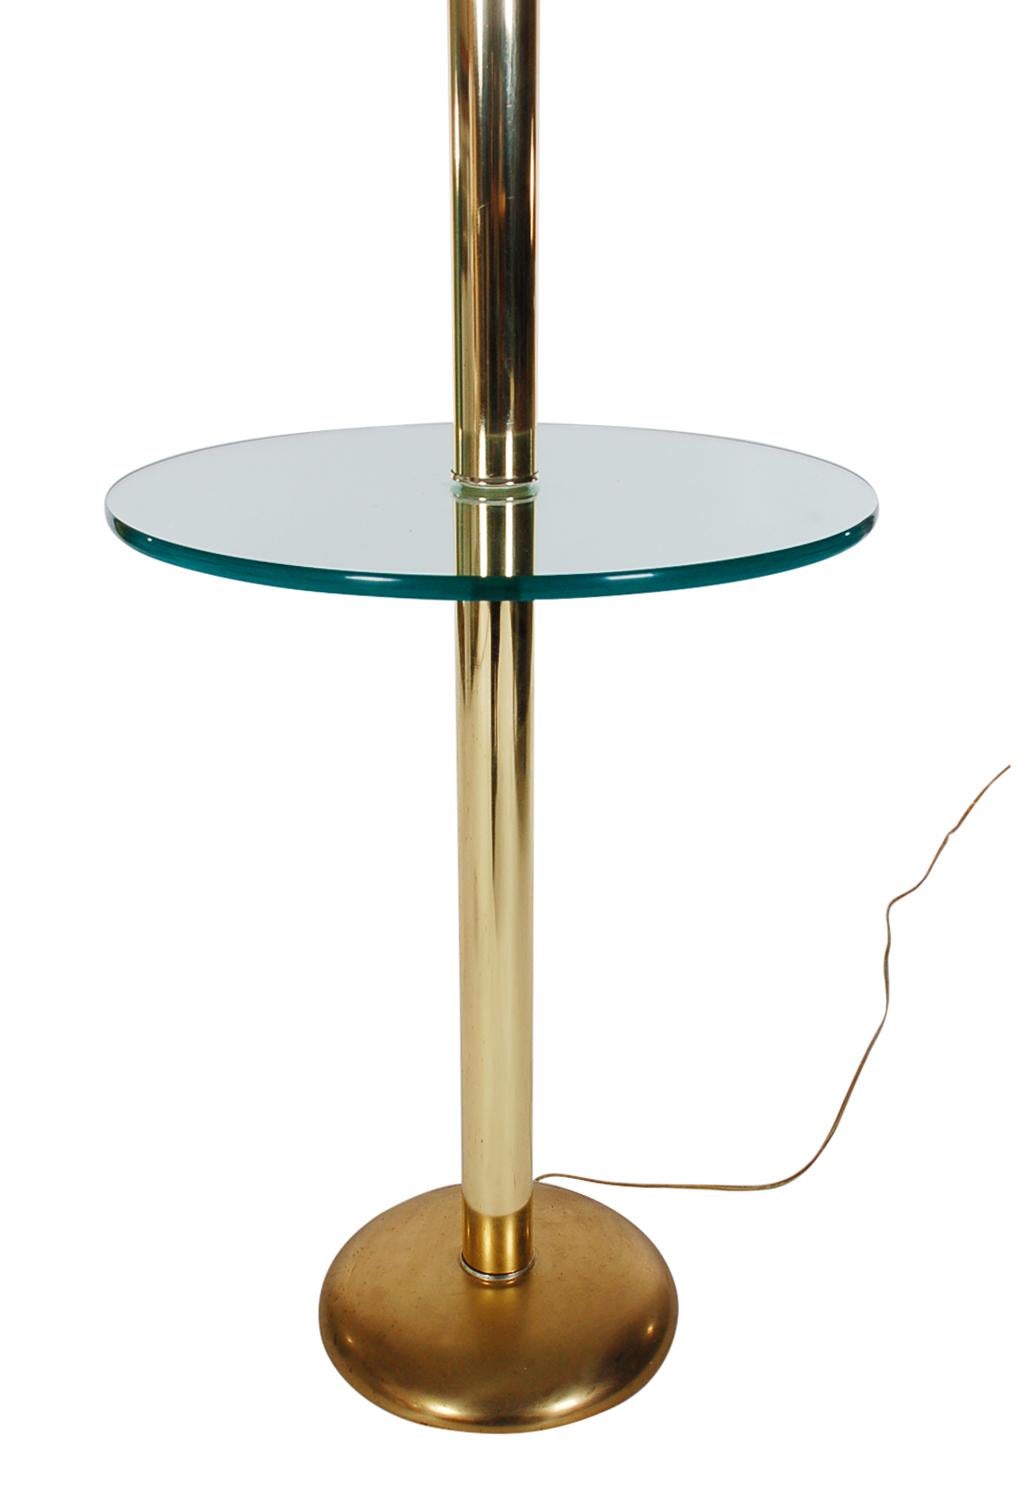 A fine quality floor lamp with round glass table from Italy circa 1982. The lamp features brass plated steel construction, clear glass circular table insert, and thick Lucite rings. Tested and working.